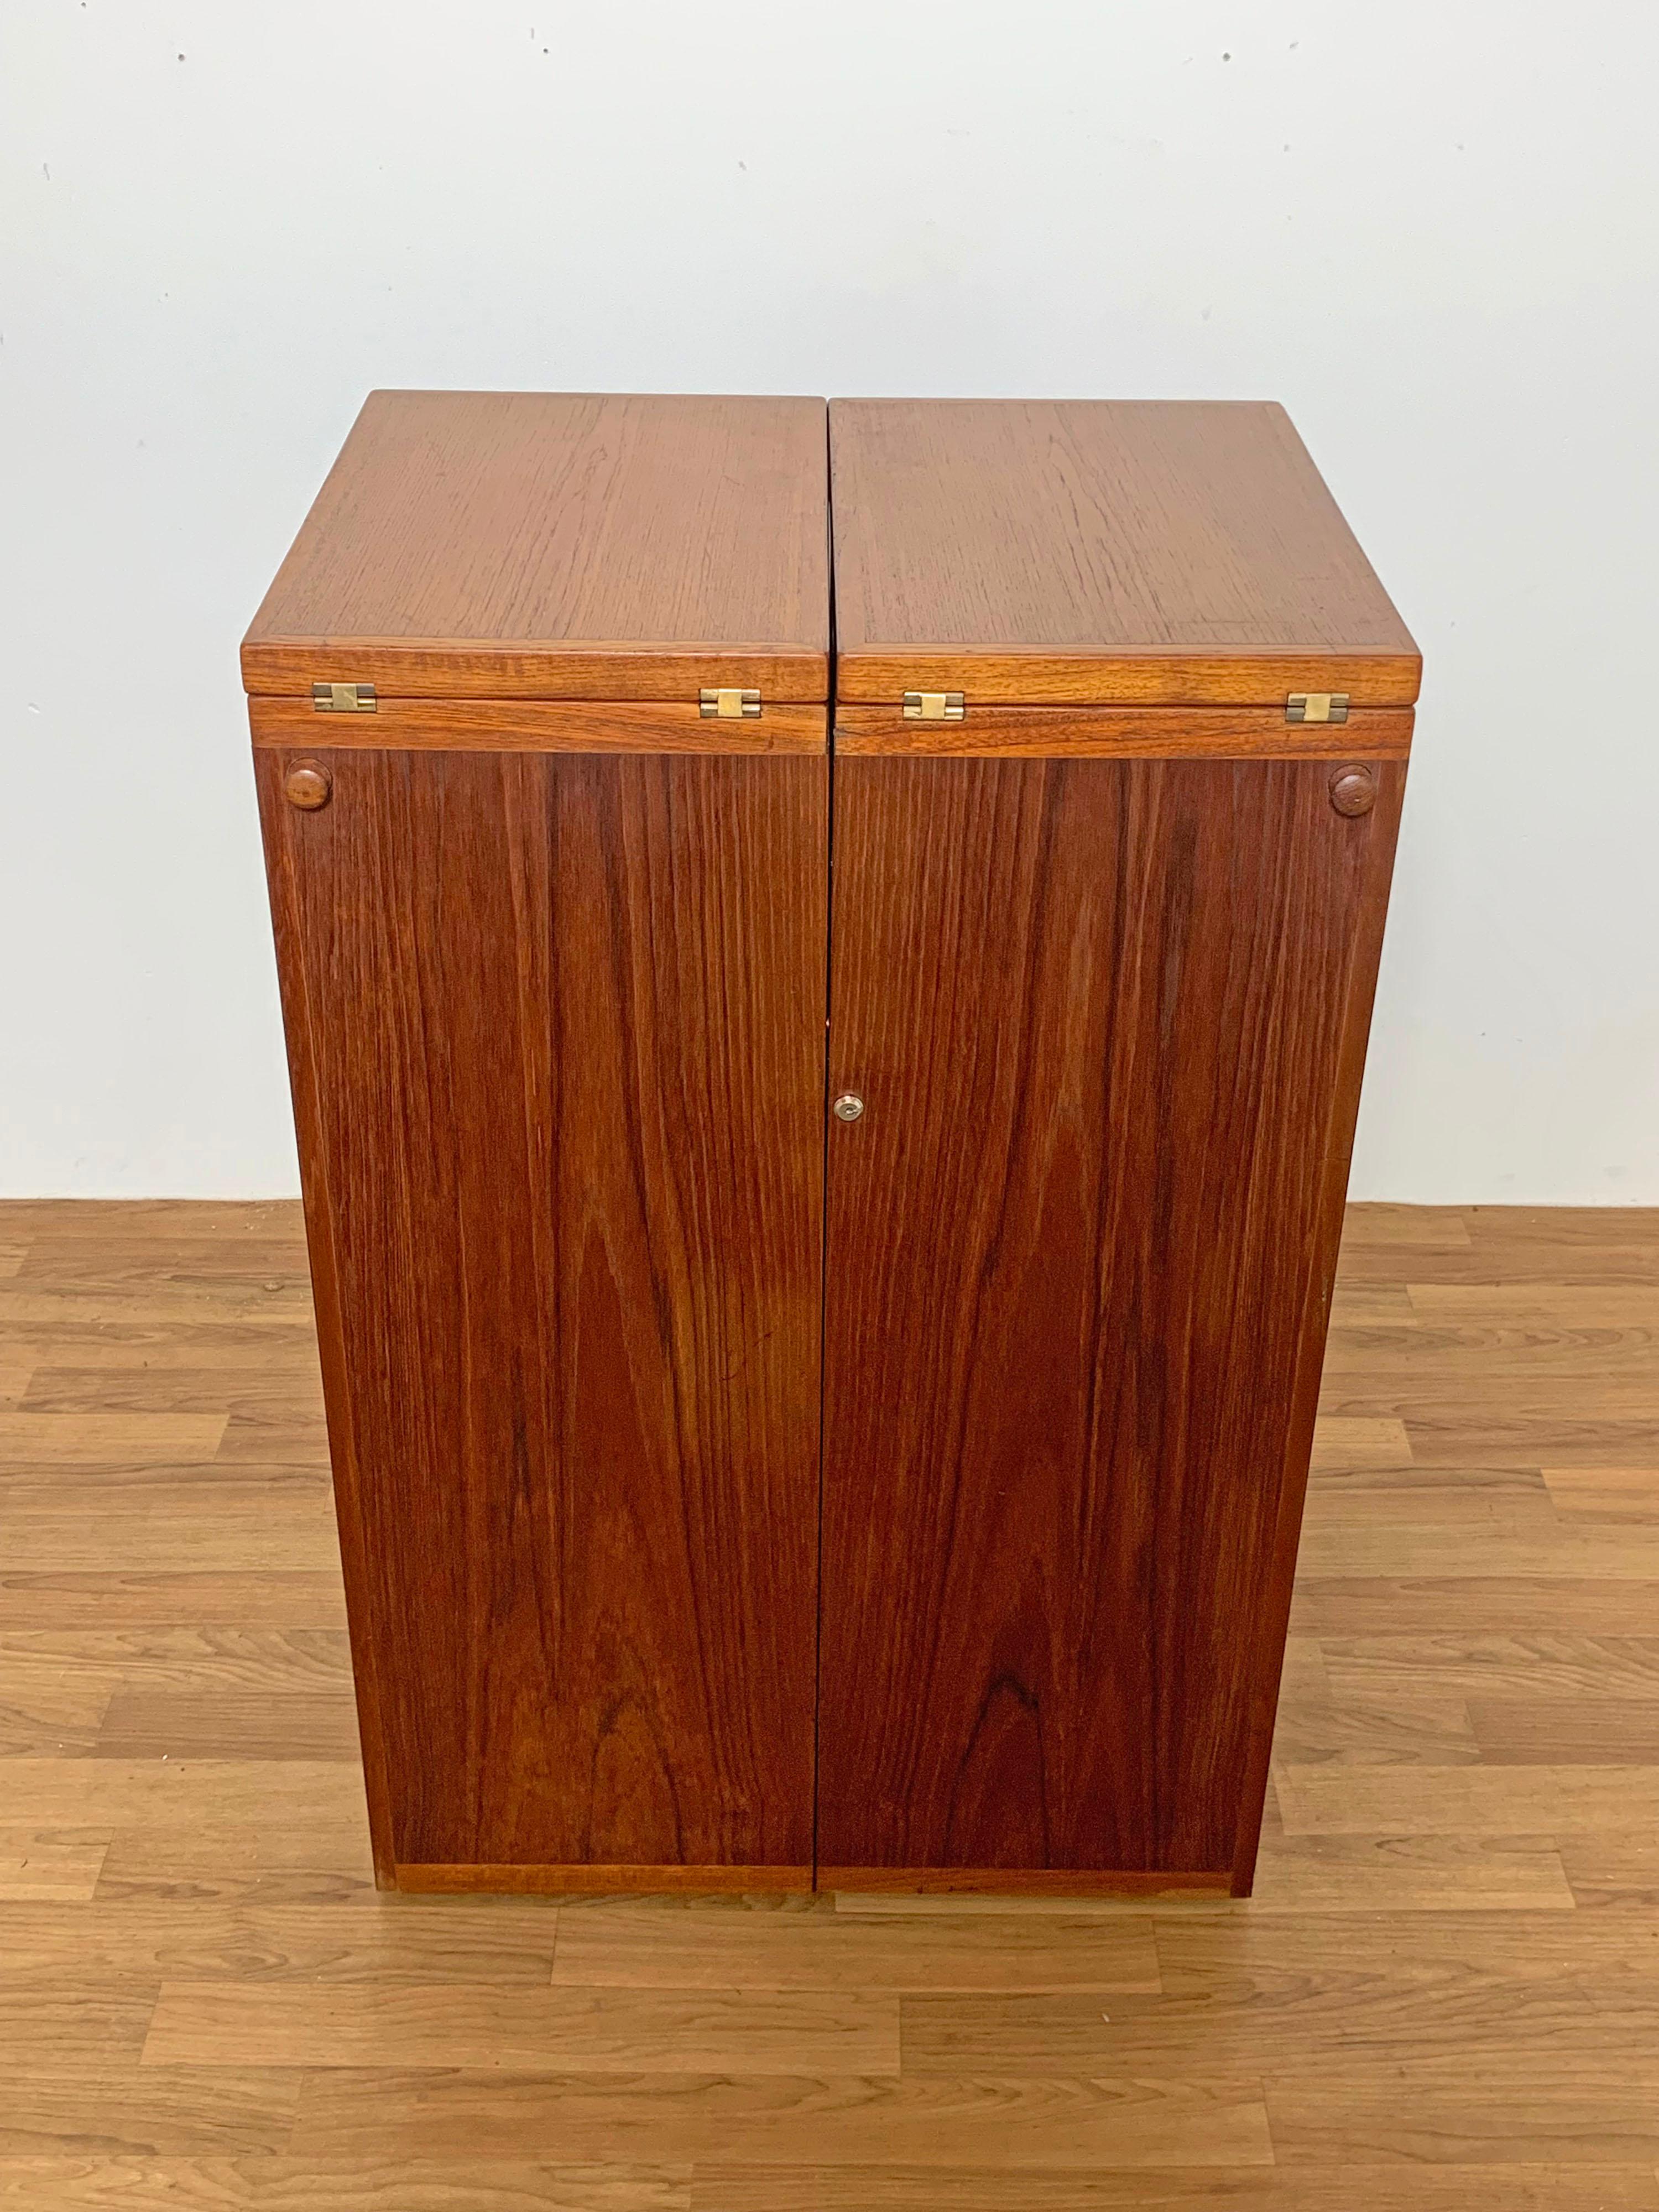 Danish teak folding bar cabinet by Reno Wahl Iversen for Dyrlund. Opens and expands to become a full service bar counter with black laminate surface for drinks.

Measures 23.25